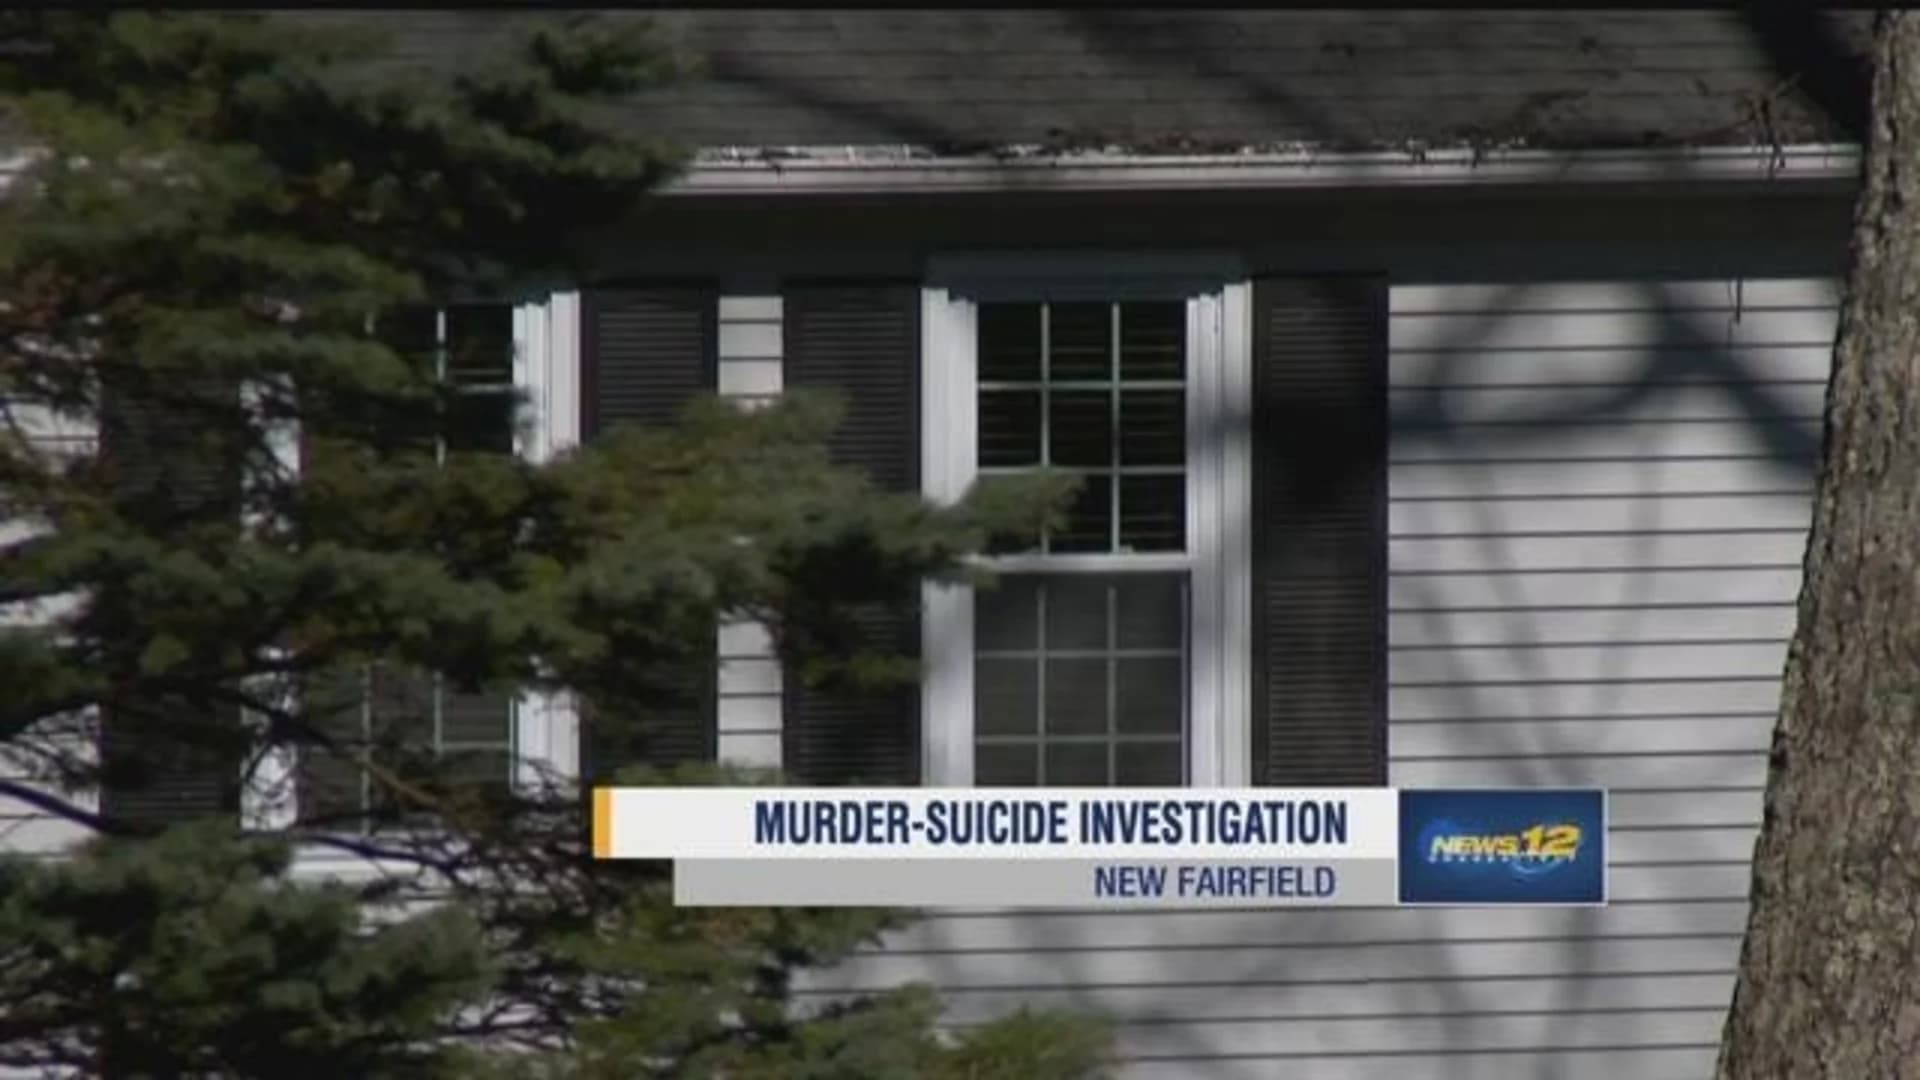 Police: Motive unclear in apparent New Fairfield murder-suicide